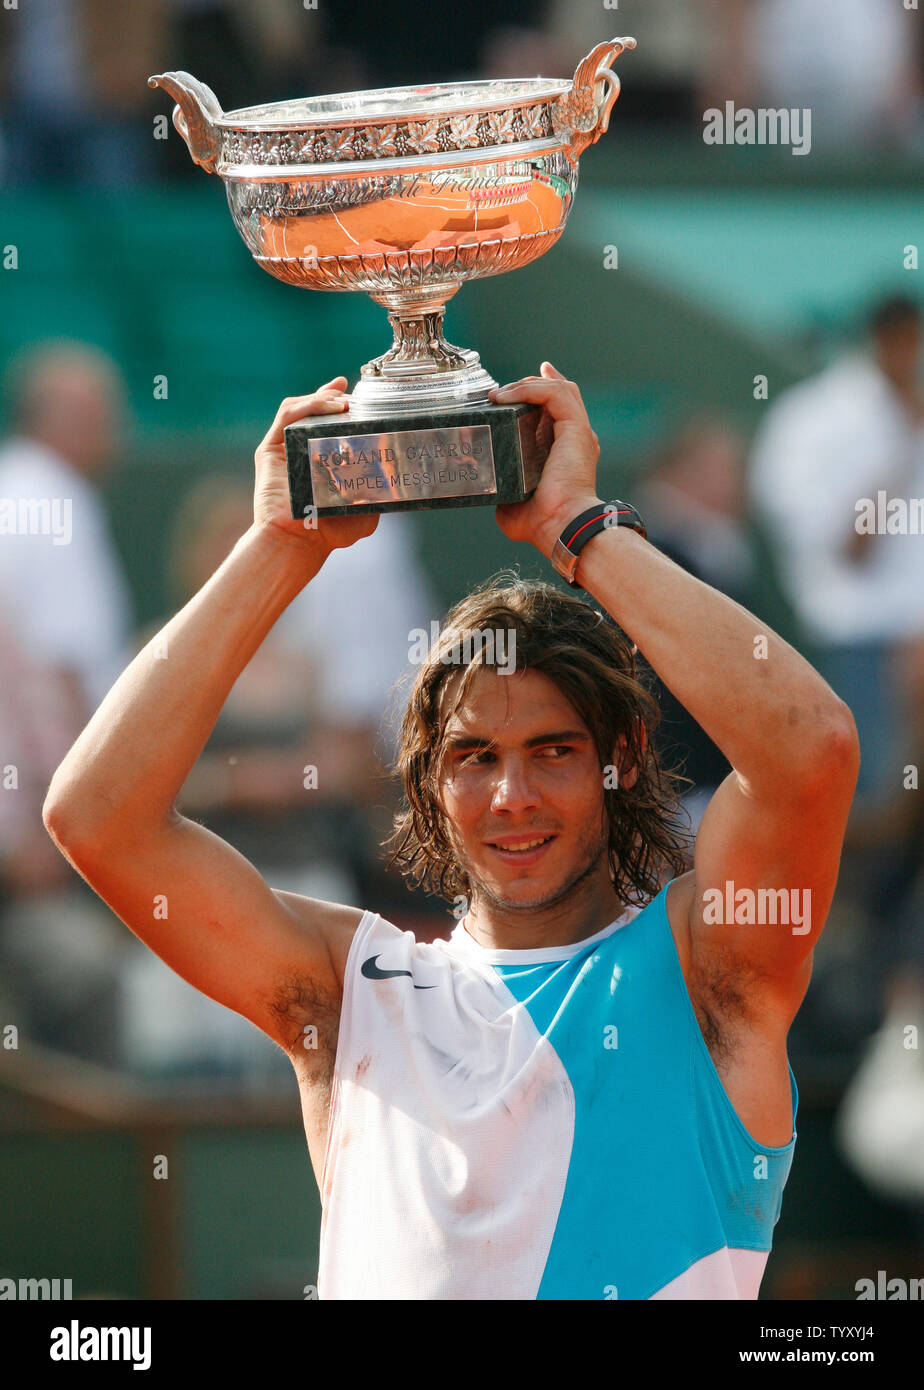 Spaniard Rafael Nadal holds up the championship trophy after winning his  final round match against Roger Federer of Switzerland at the French Open  at Roland Garros in Paris on June 10, 2007.